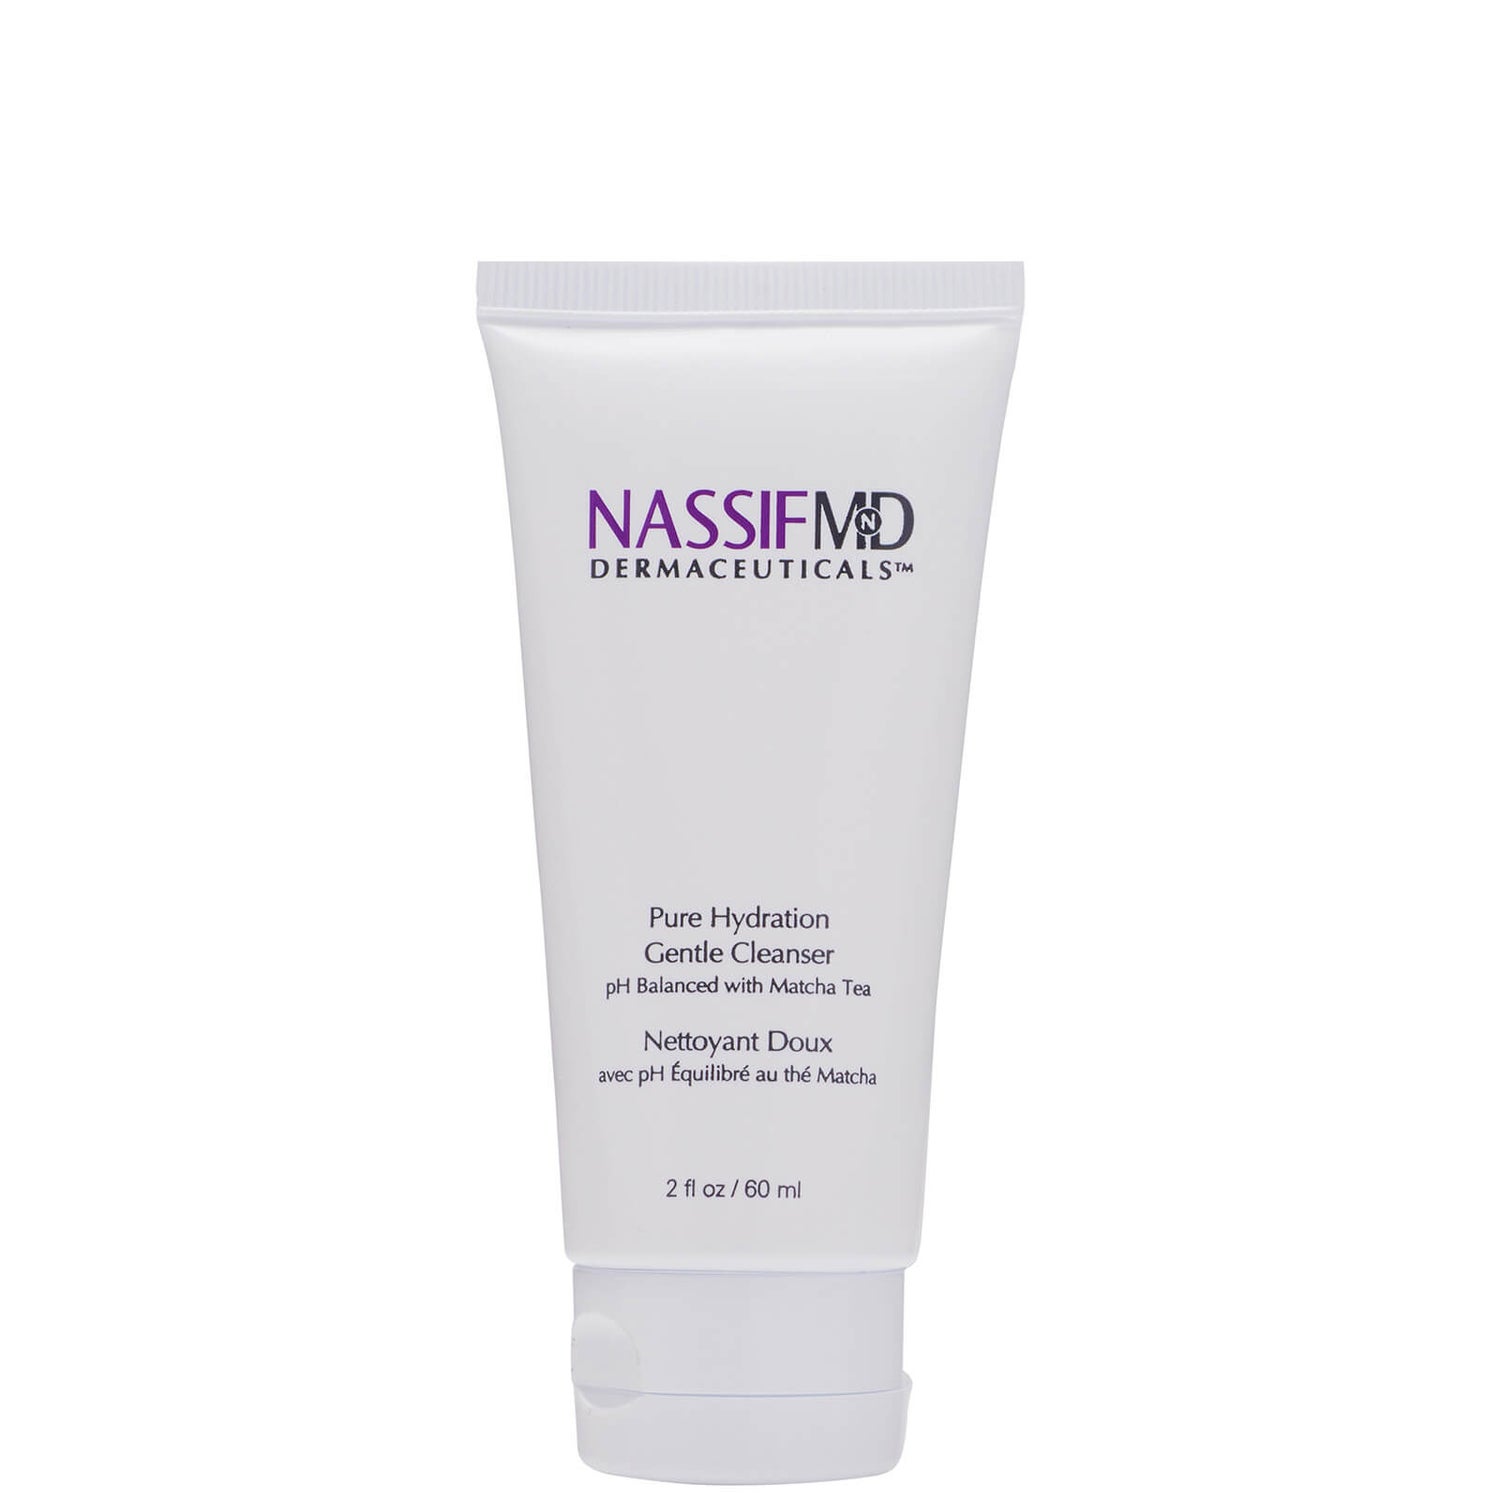 NassifMD Dermaceuticals Pure Hydration Facial Cleanser 60ml